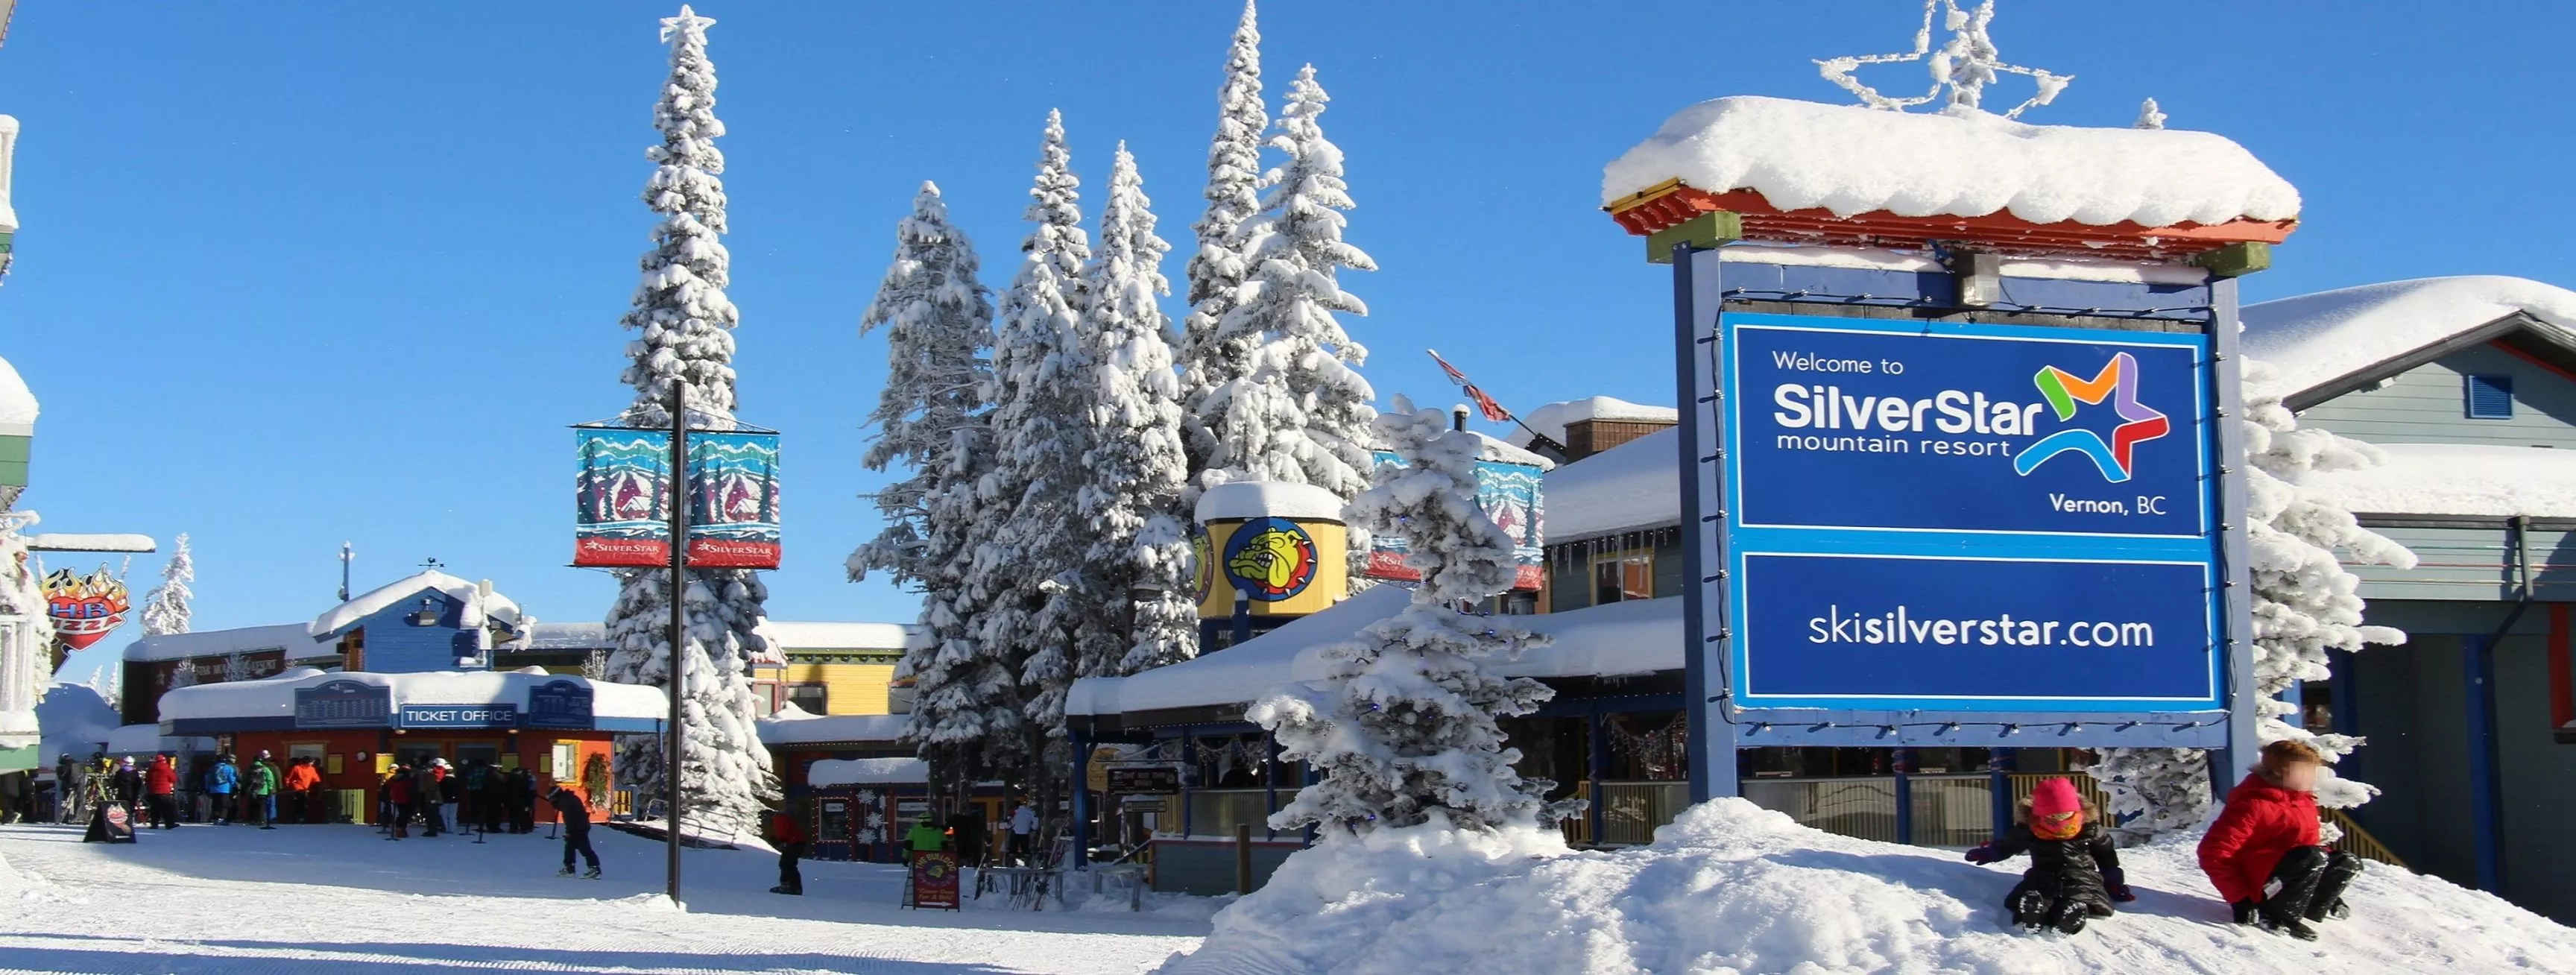 Silver Star Mountain Resort in Canada, North America | Snowboarding,Skiing - Rated 4.3